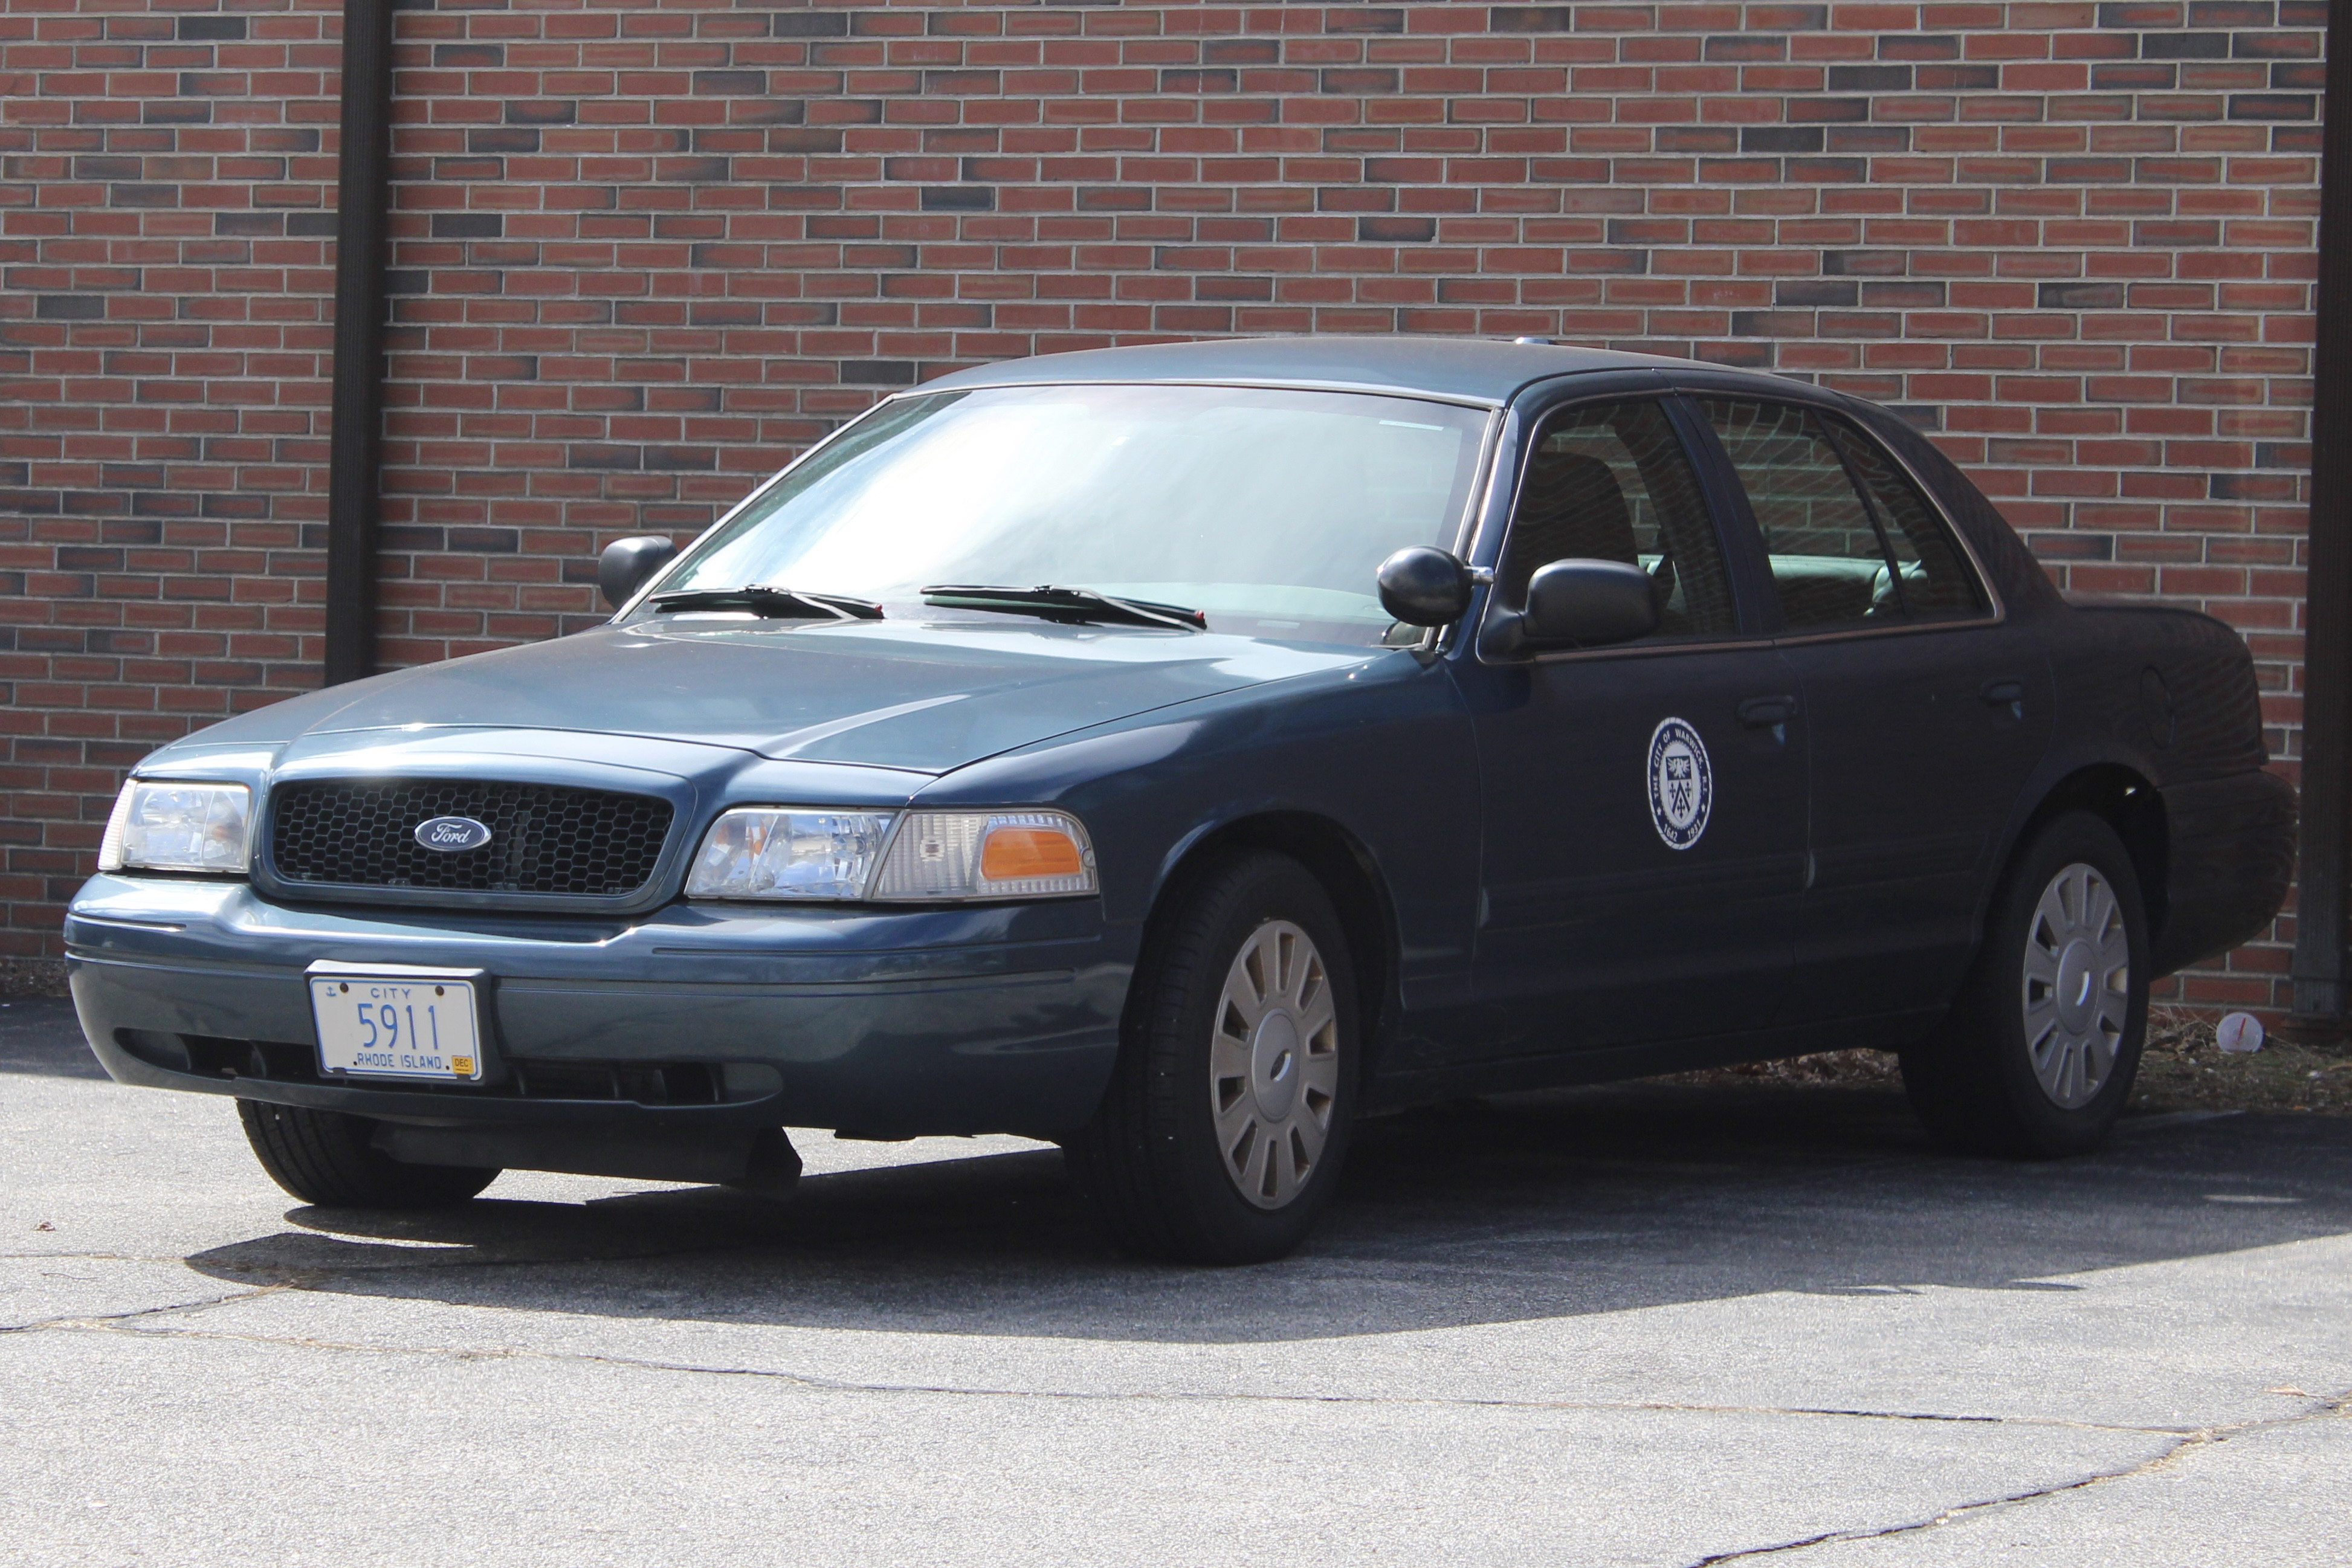 A photo  of Warwick Public Works
            Car 5911, a 2009-2011 Ford Crown Victoria Police Interceptor             taken by @riemergencyvehicles